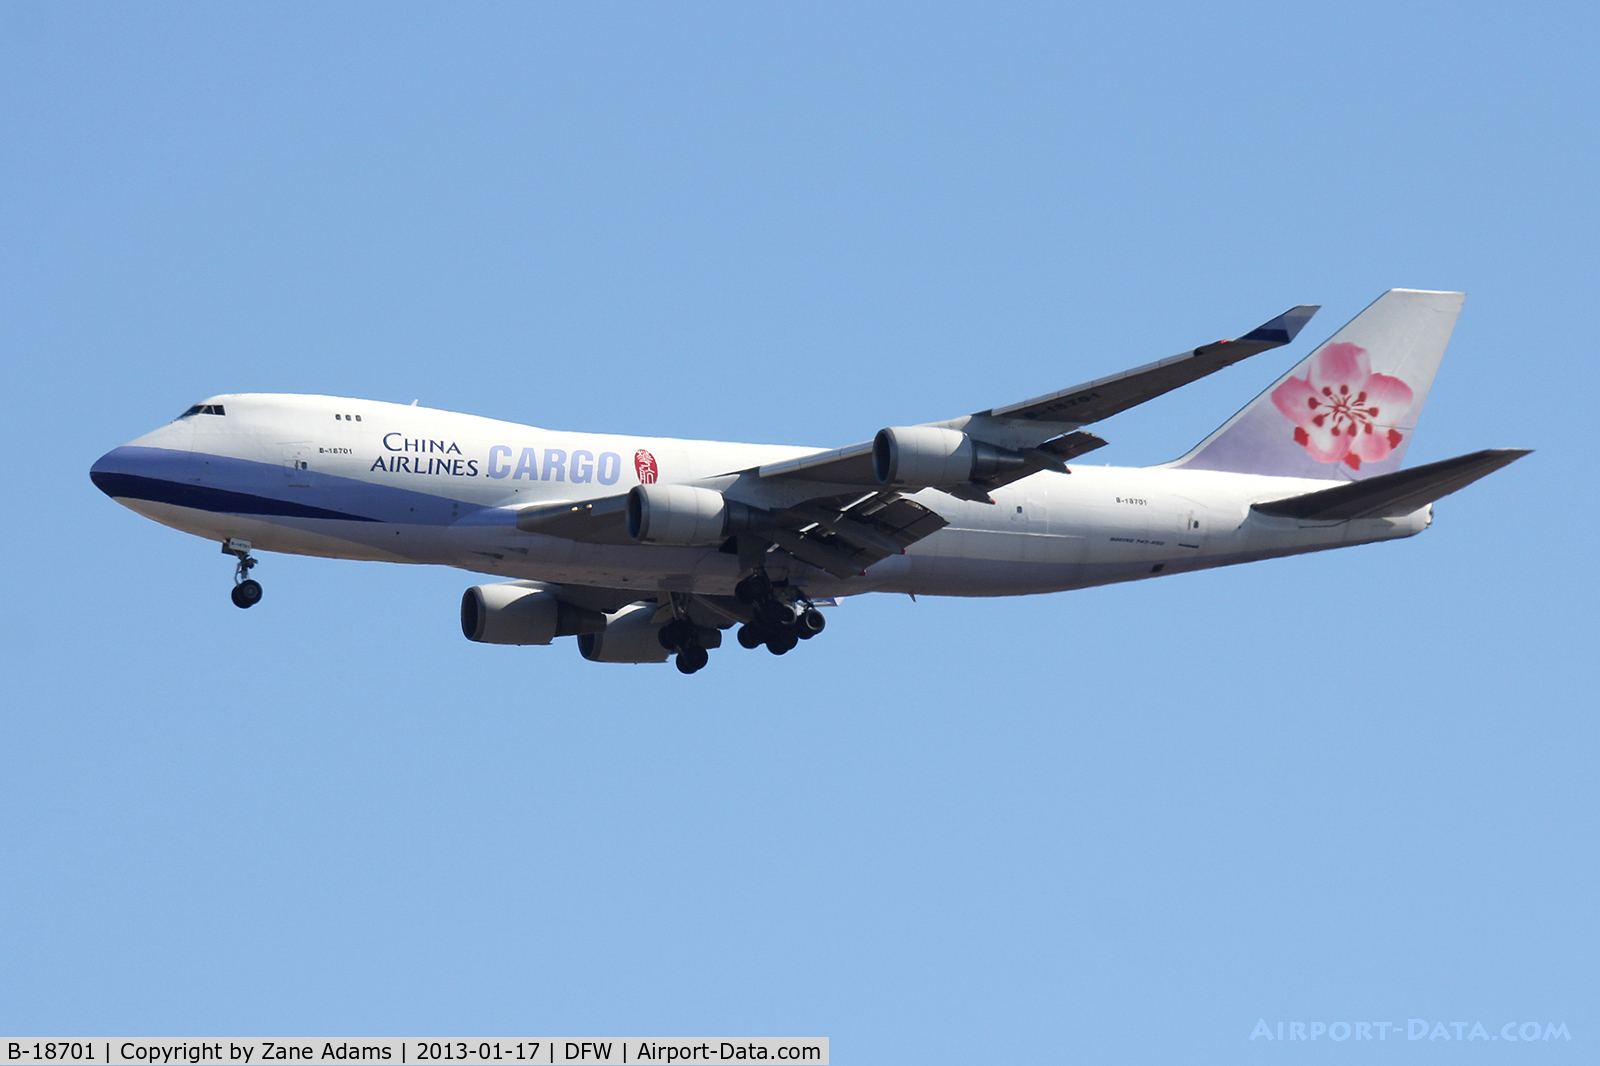 B-18701, 2000 Boeing 747-409F/SCD C/N 30759, China Airlines Cargo landing at DFW Airport